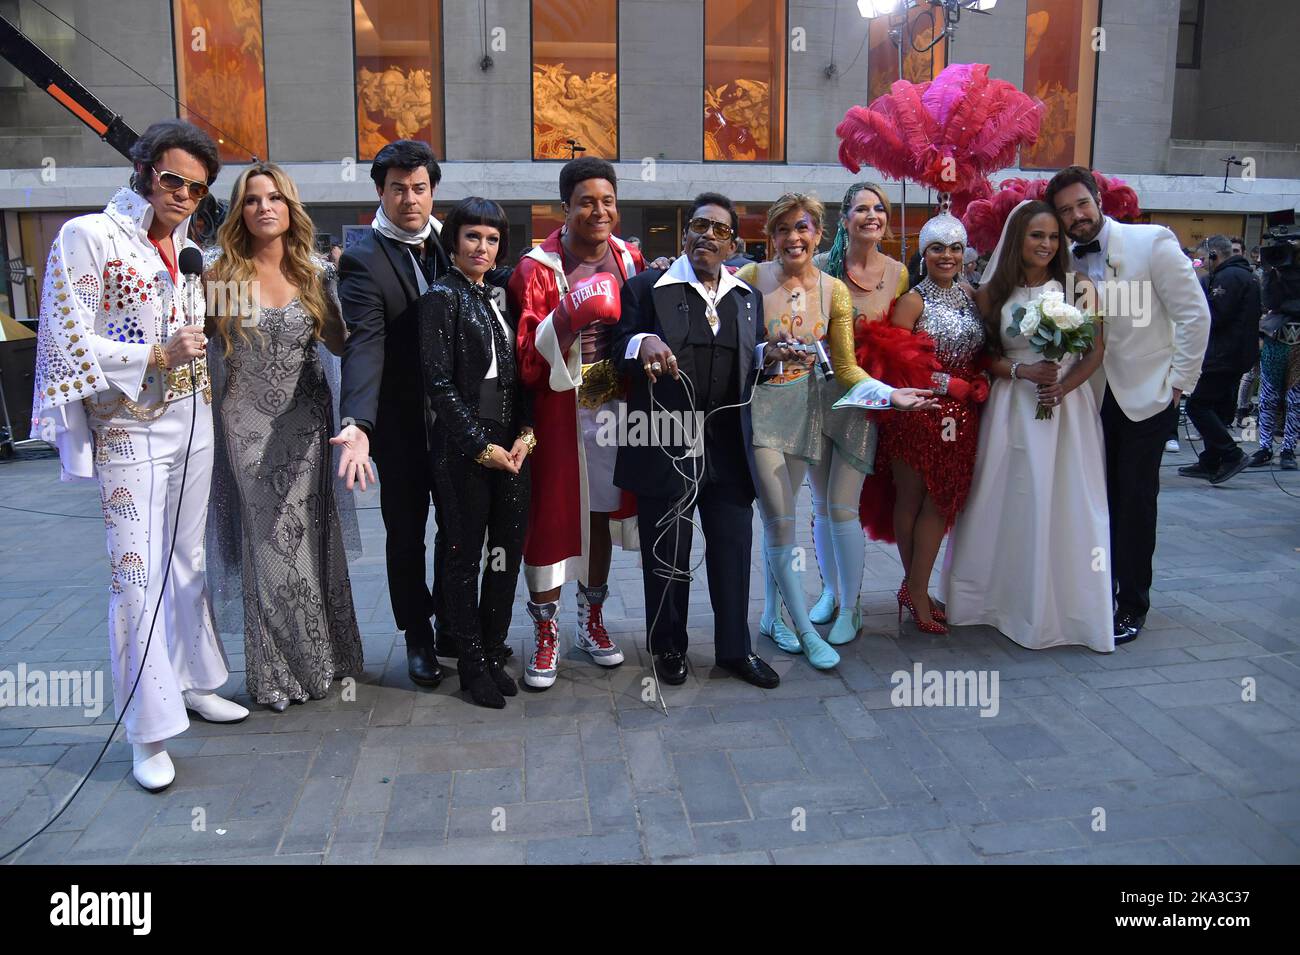 New York, USA. 31st Oct, 2022. (L-R) Willie Geist, Jenna Hager Bush, Carson Daly, Dylan Dreyer, Craig Melvin, Al Roker, Hoda Kotb, Savannah Guthrie, Sheinelle Jones, Kristen Welker and Peter Alexander dress is costumes during The Today Show on Halloween at Rockefeller Plaza, New York, NY, October 31, 2022. (Photo by Anthony Behar/Sipa USA) Credit: Sipa USA/Alamy Live News Stock Photo